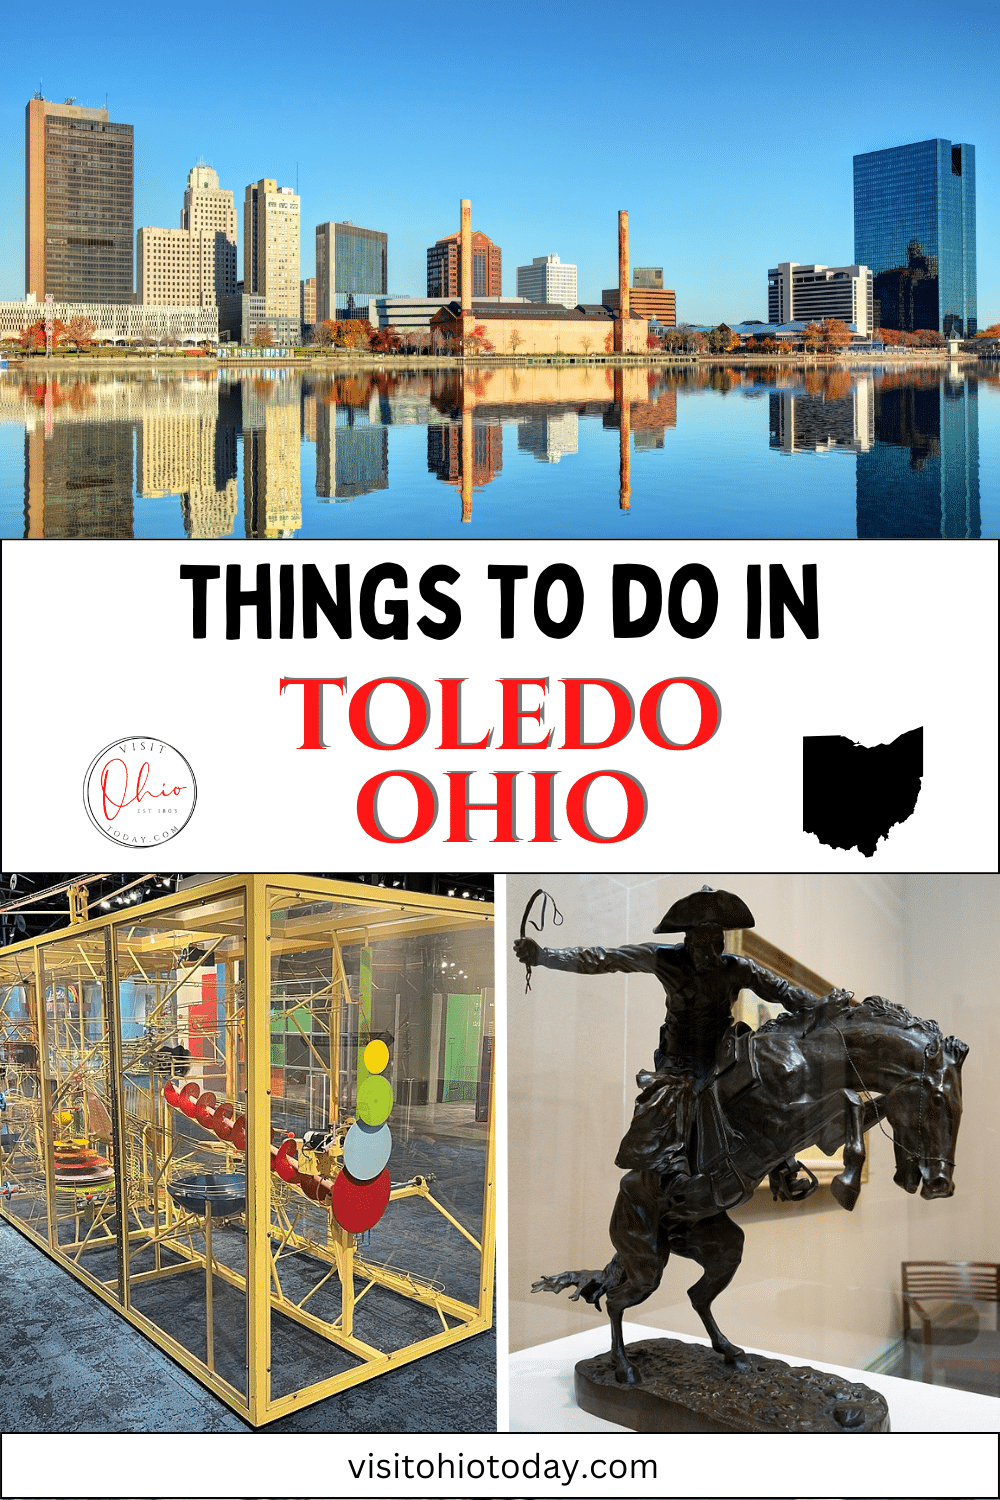 vertical image with a photo at the top of the skyline of Toledo from the Maumee River, a photo of the Rube Goldberg Machine at Imagination Station, and a photo of a bronze statue from the Toledo Museum of Art. Images via Canva and Wikimedia Commons public domain images